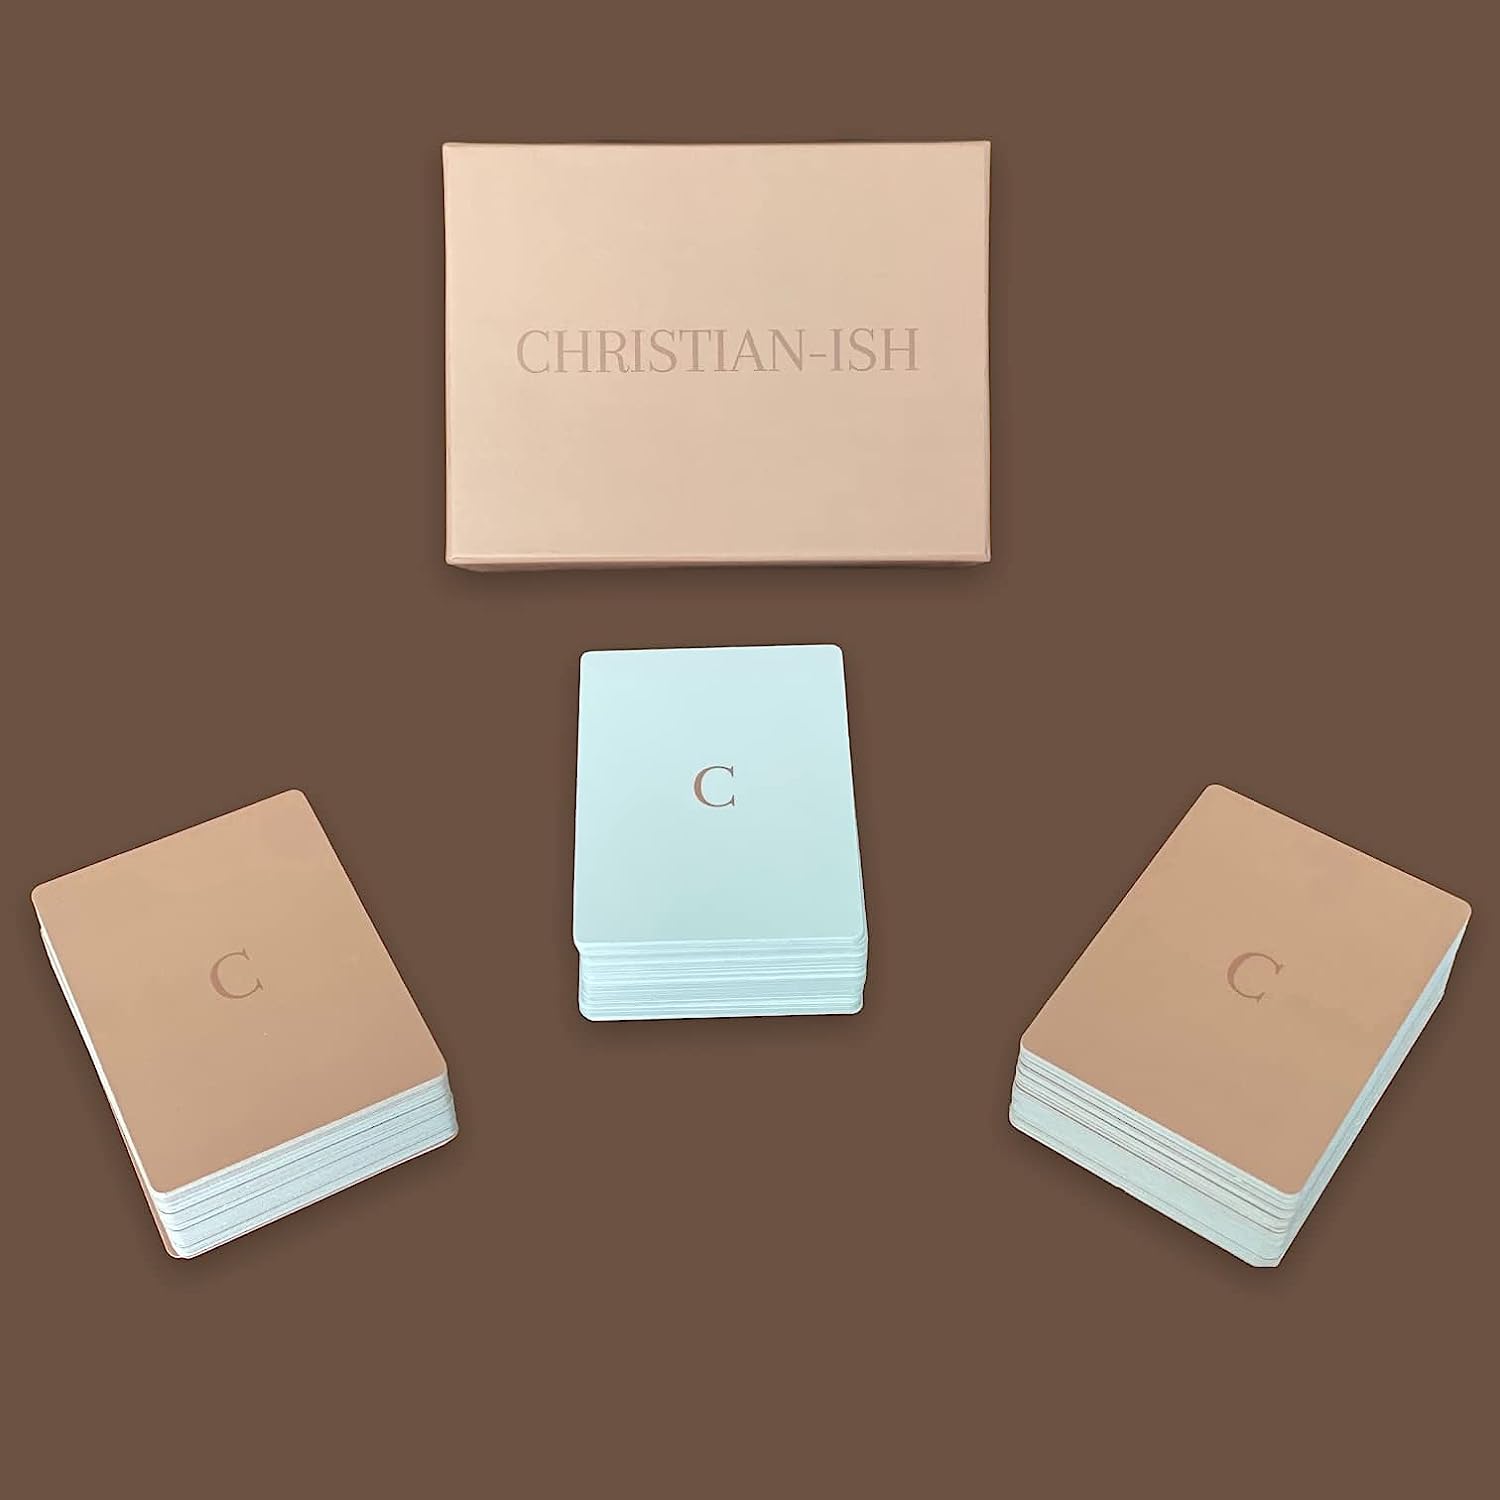 Cards (Clean Christian Card Game) Family Card Game, Church Humor, Church Jokes, Small Group, Game Night ETC